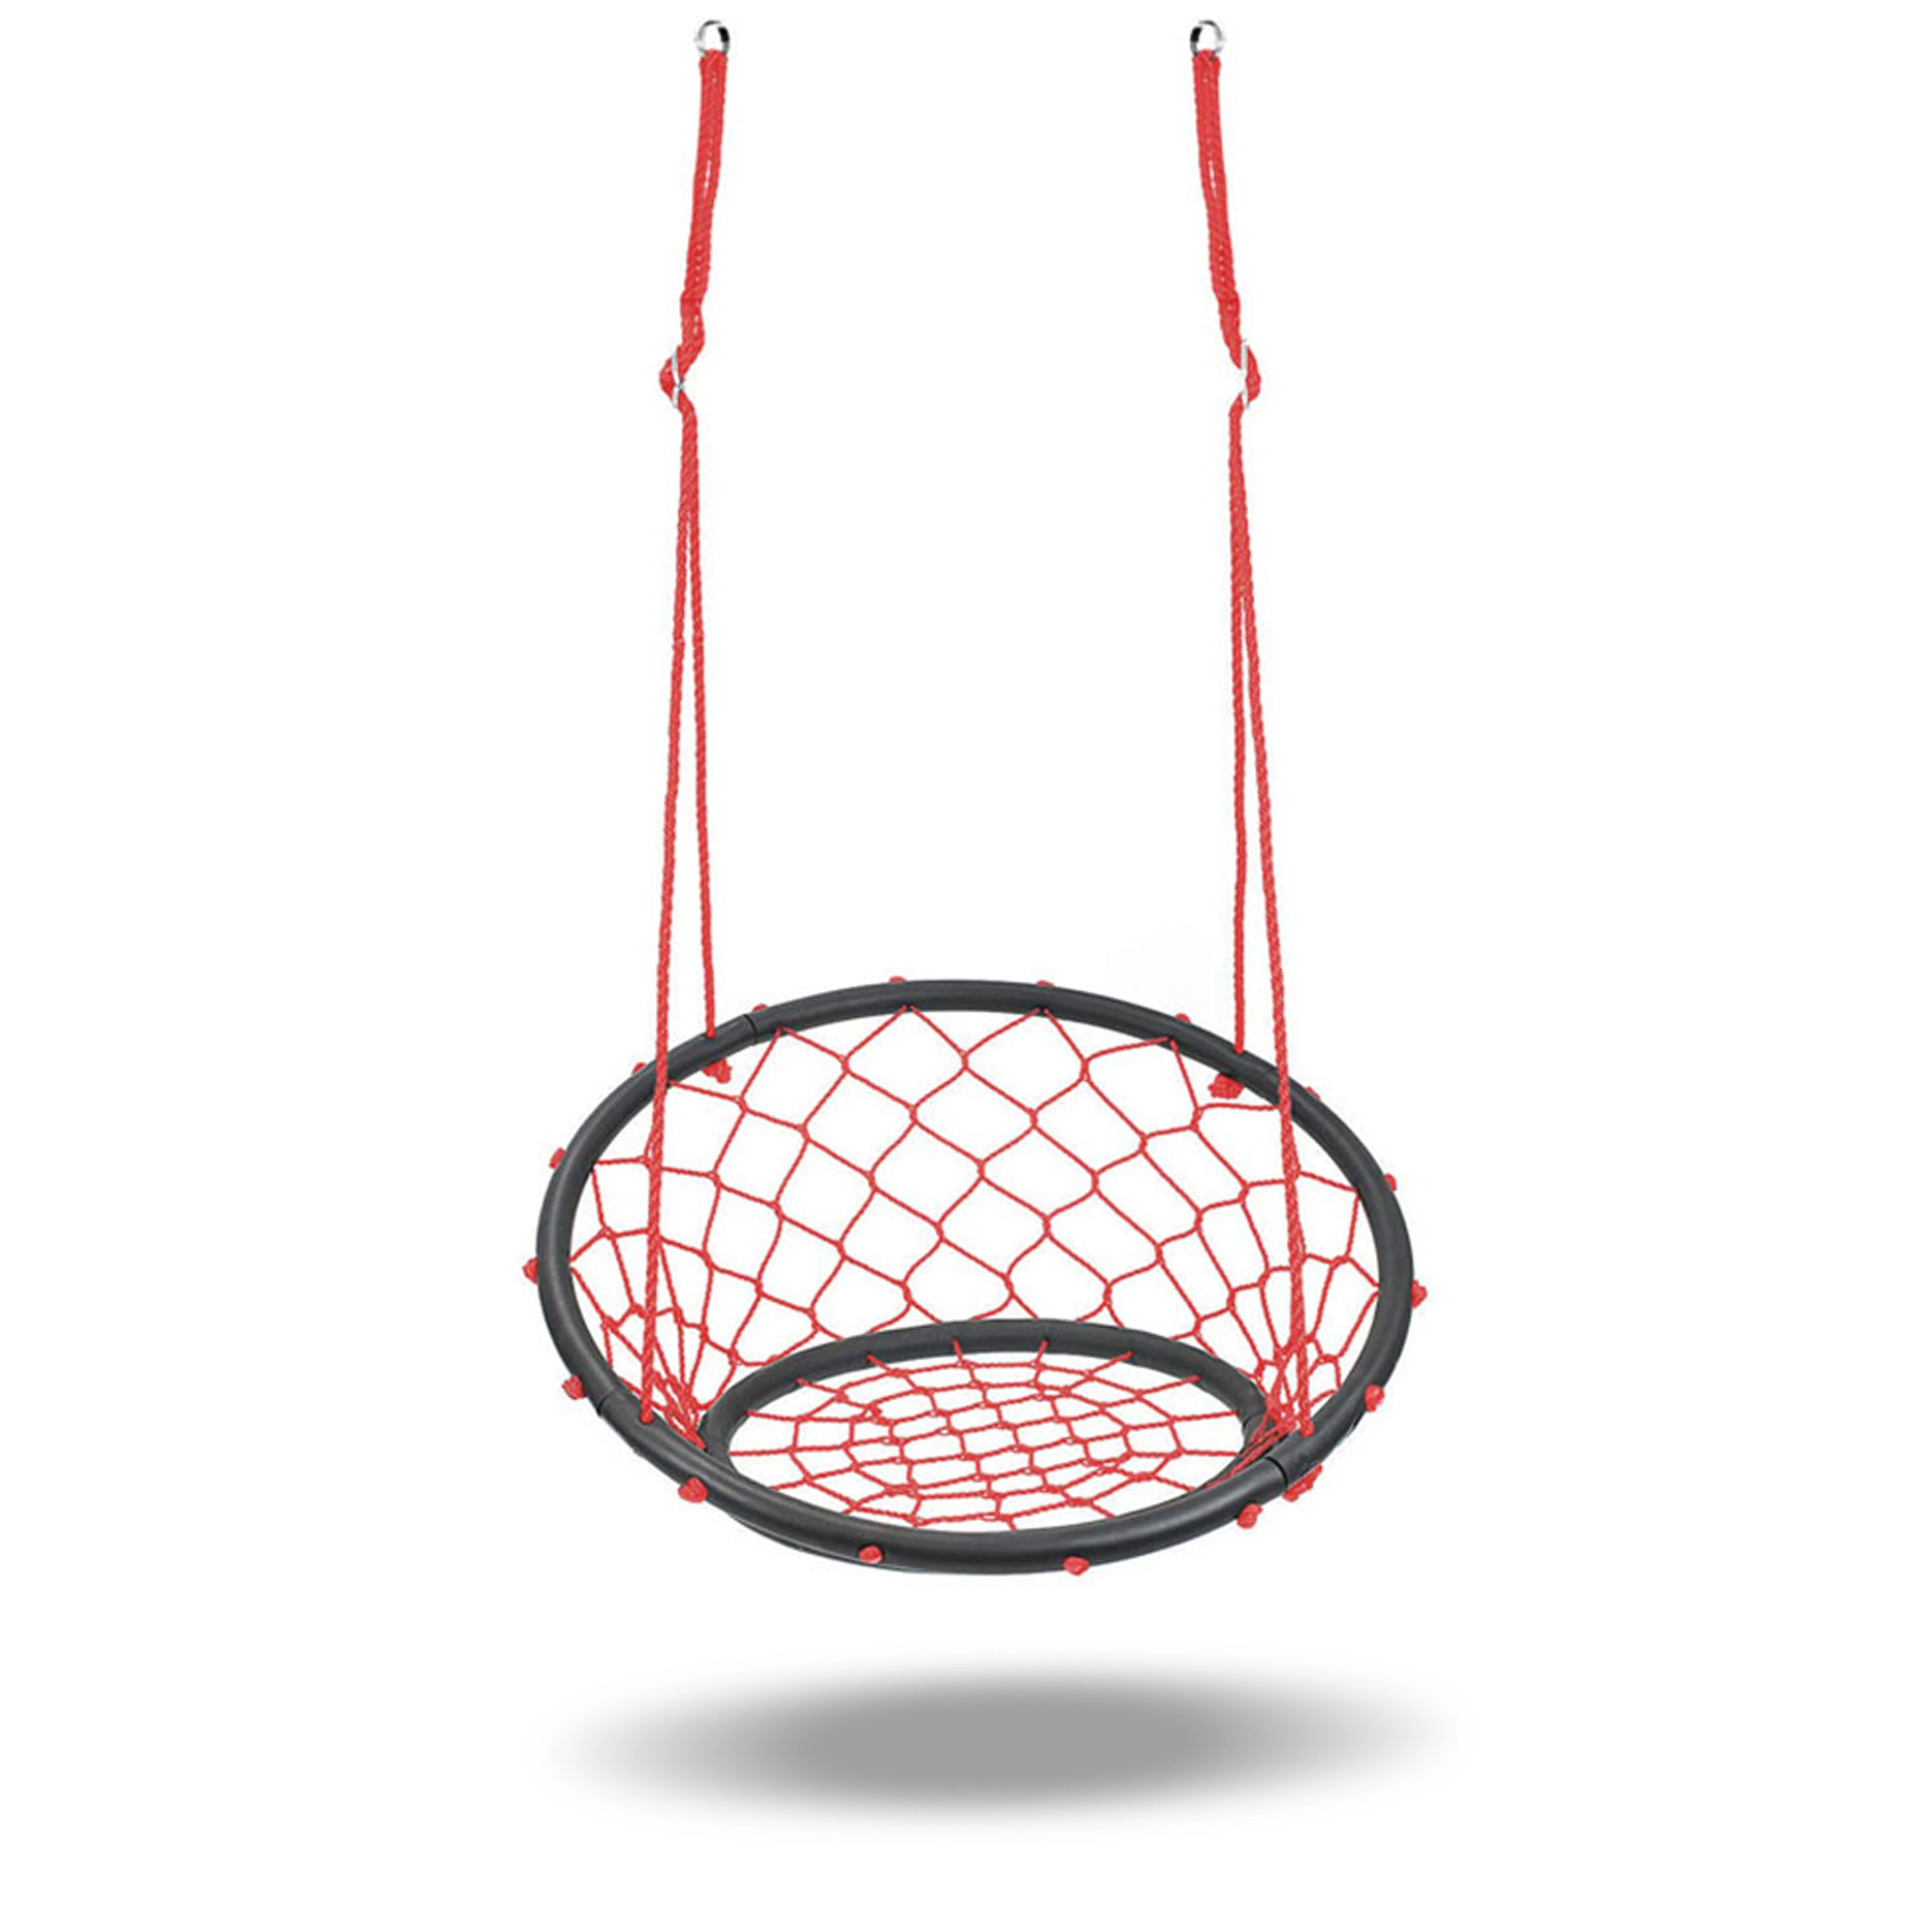 Home garden happy tree nest net chair swing with metal tube (62349787779)